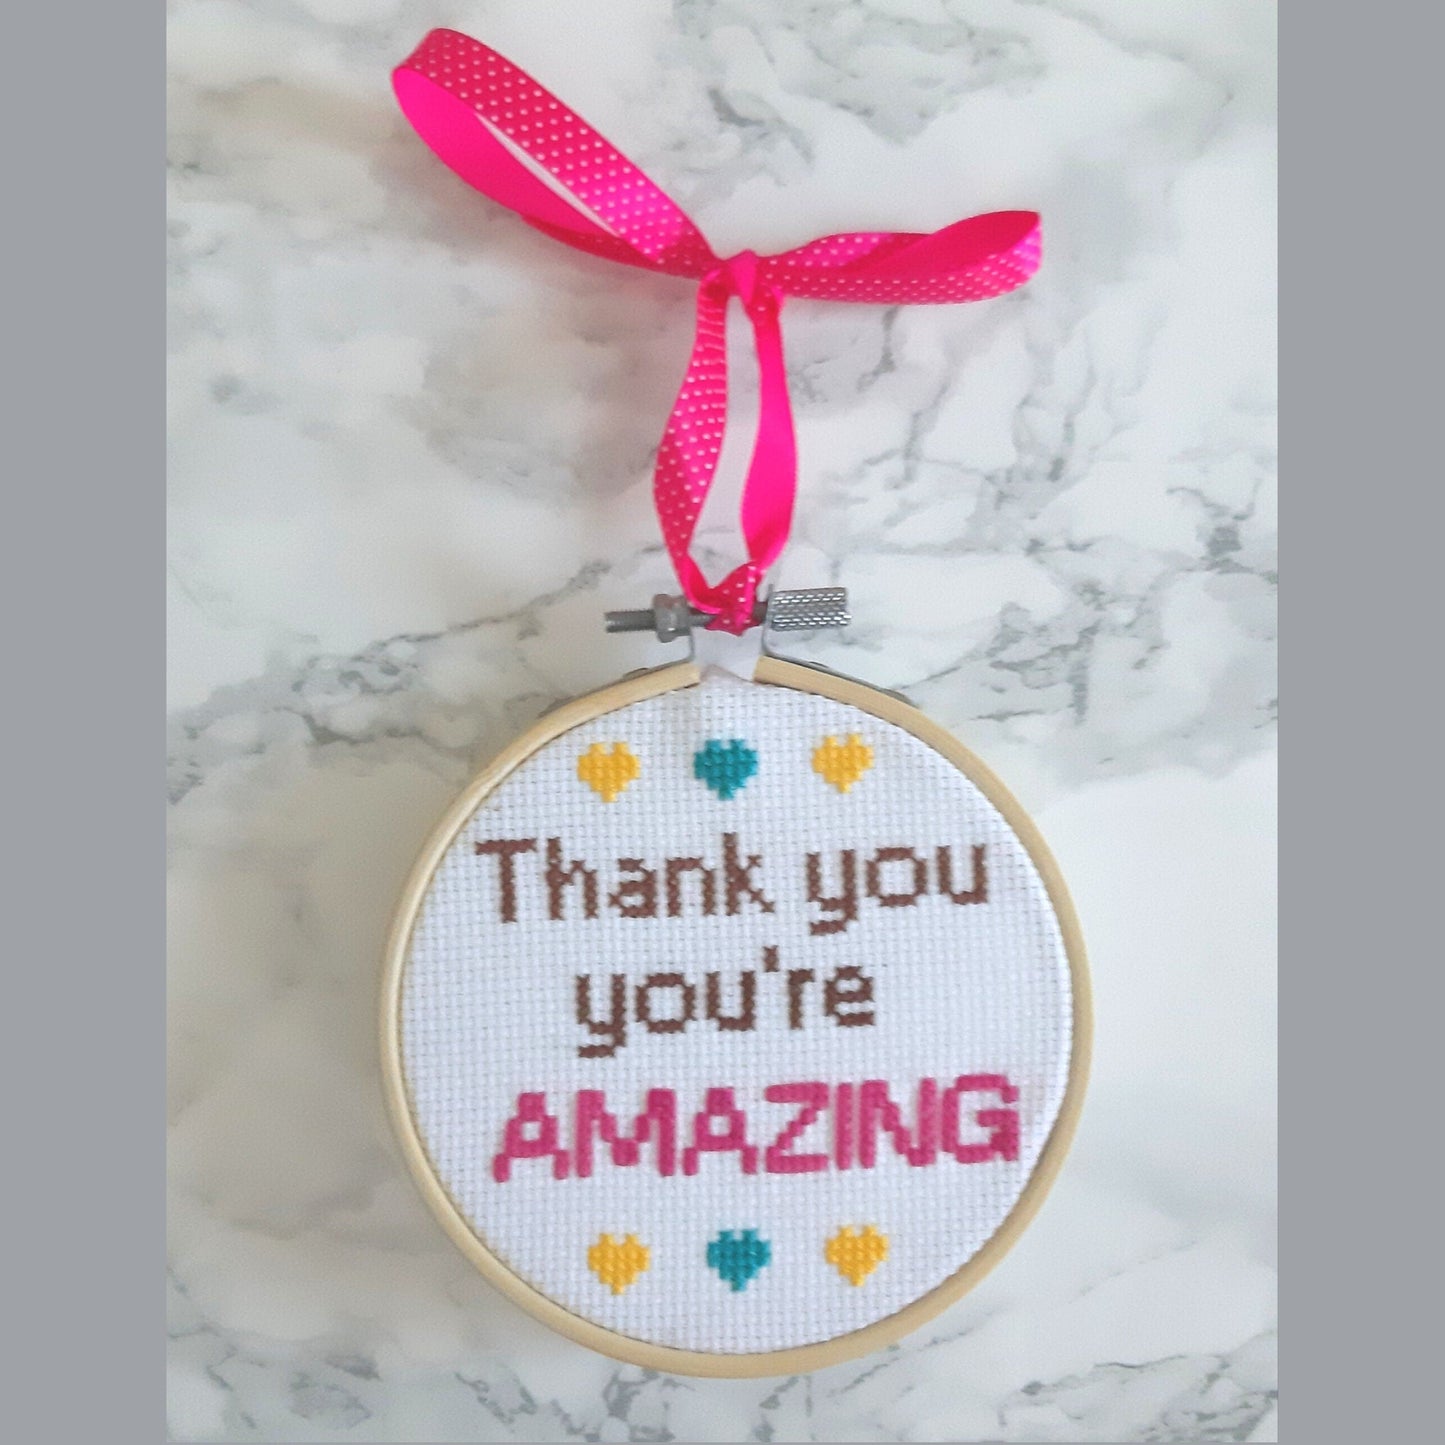 Thank you you're amazing, completed cross stitch quote - Thistleflat Crafts